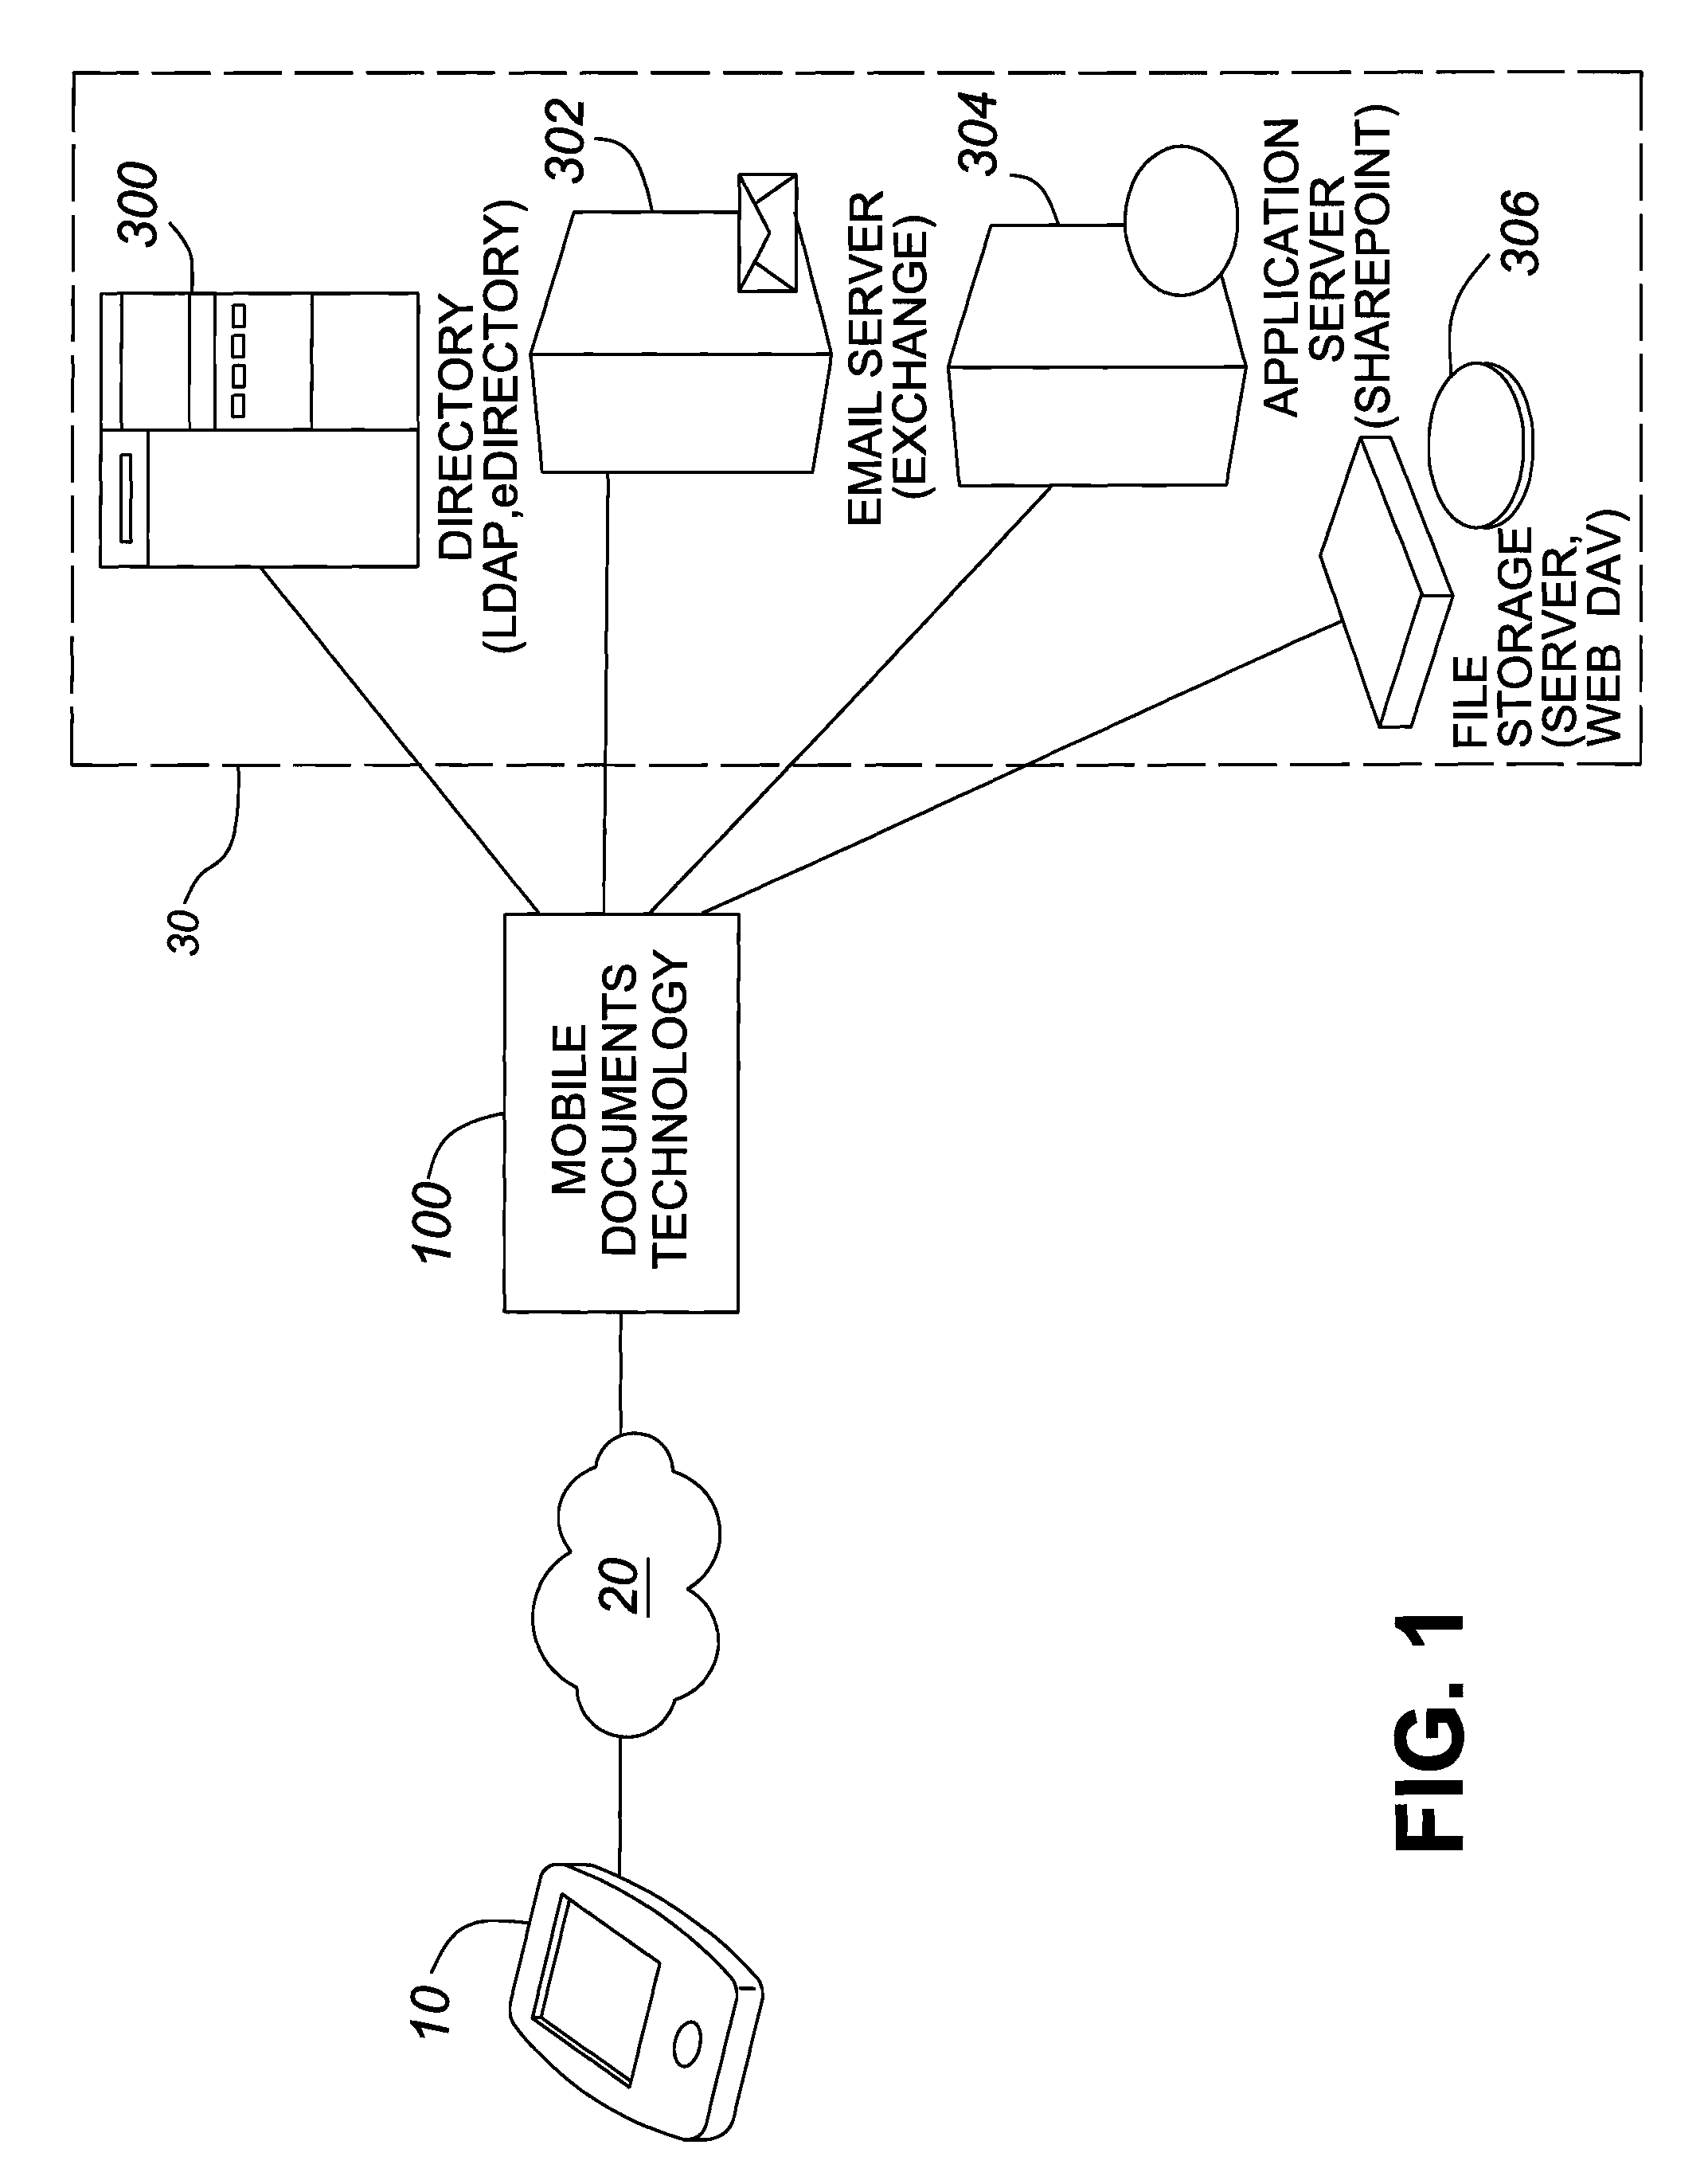 System and method for secure management of mobile user access to enterprise network resources